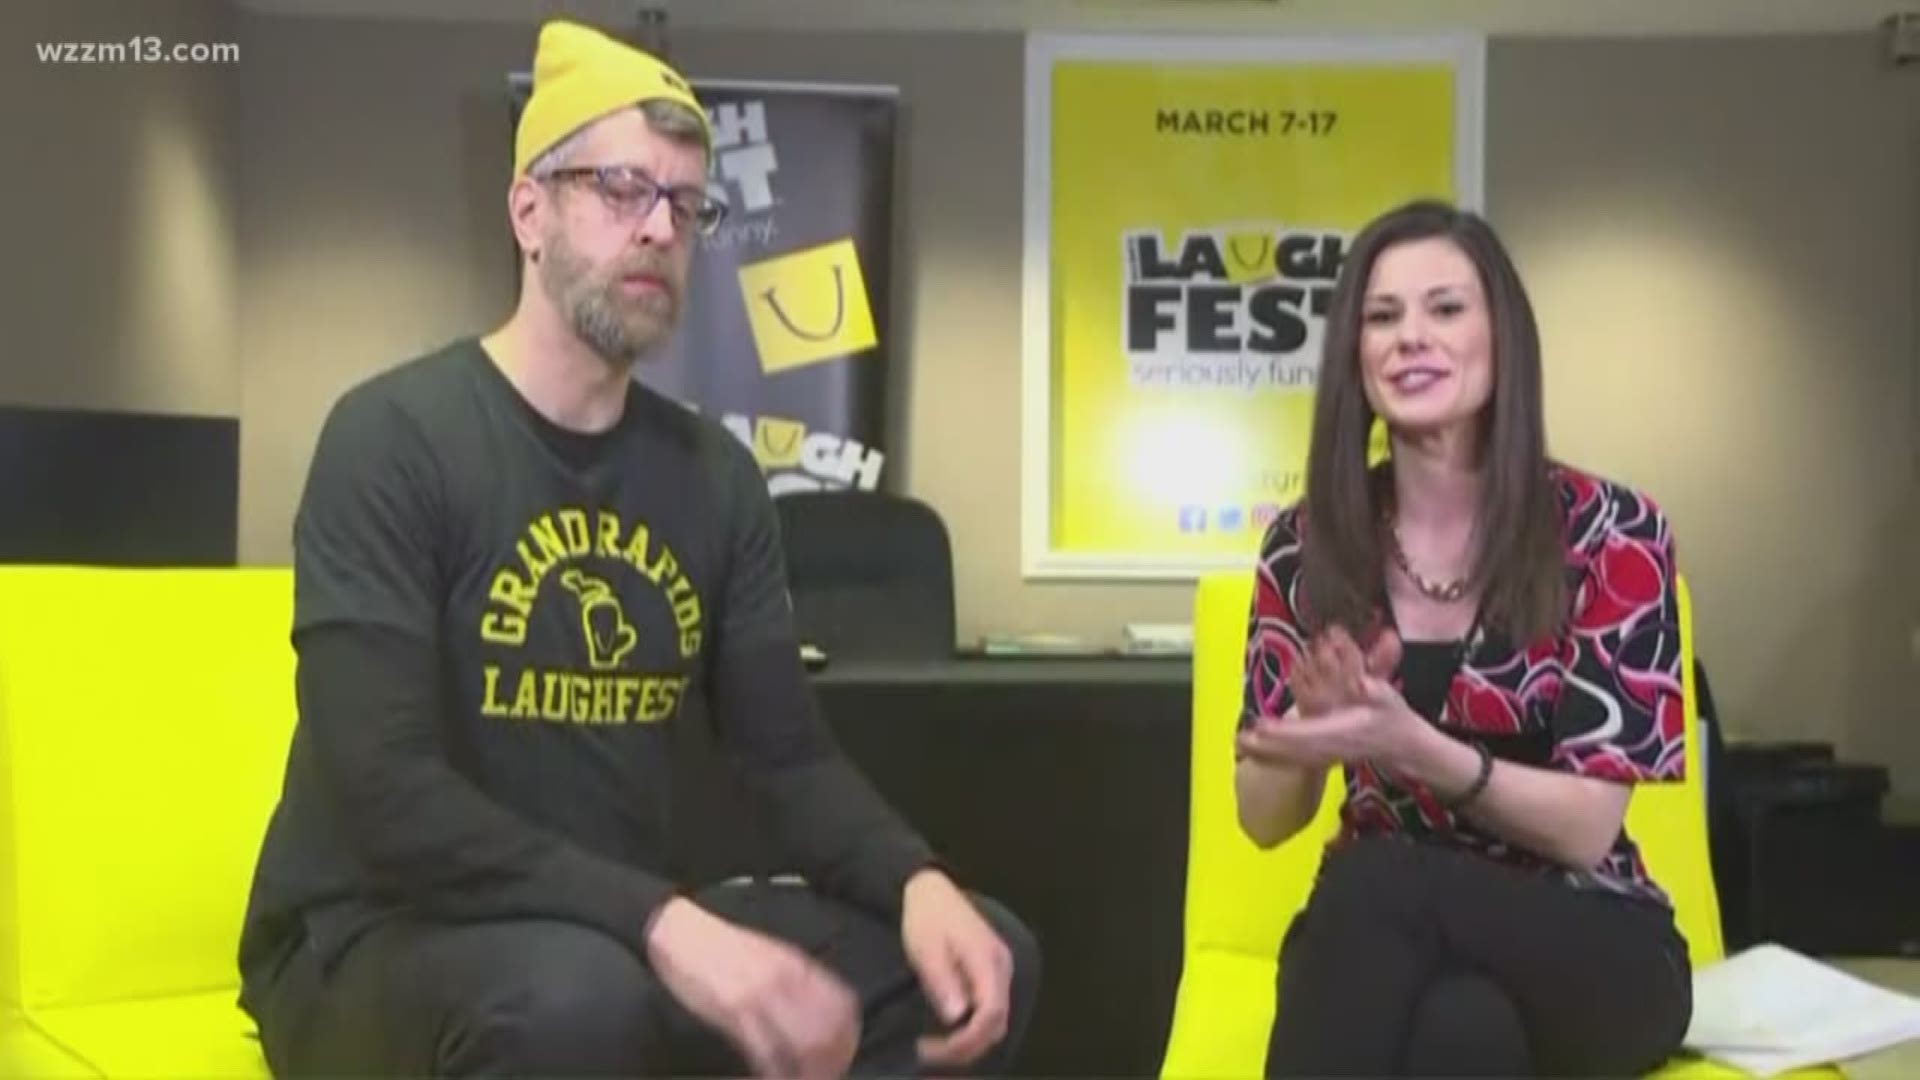 West Michigan's largest comedy festival is just three weeks away but you don't have to wait until then to get your laugh on. LaughFest Central opens Feb. 18th.